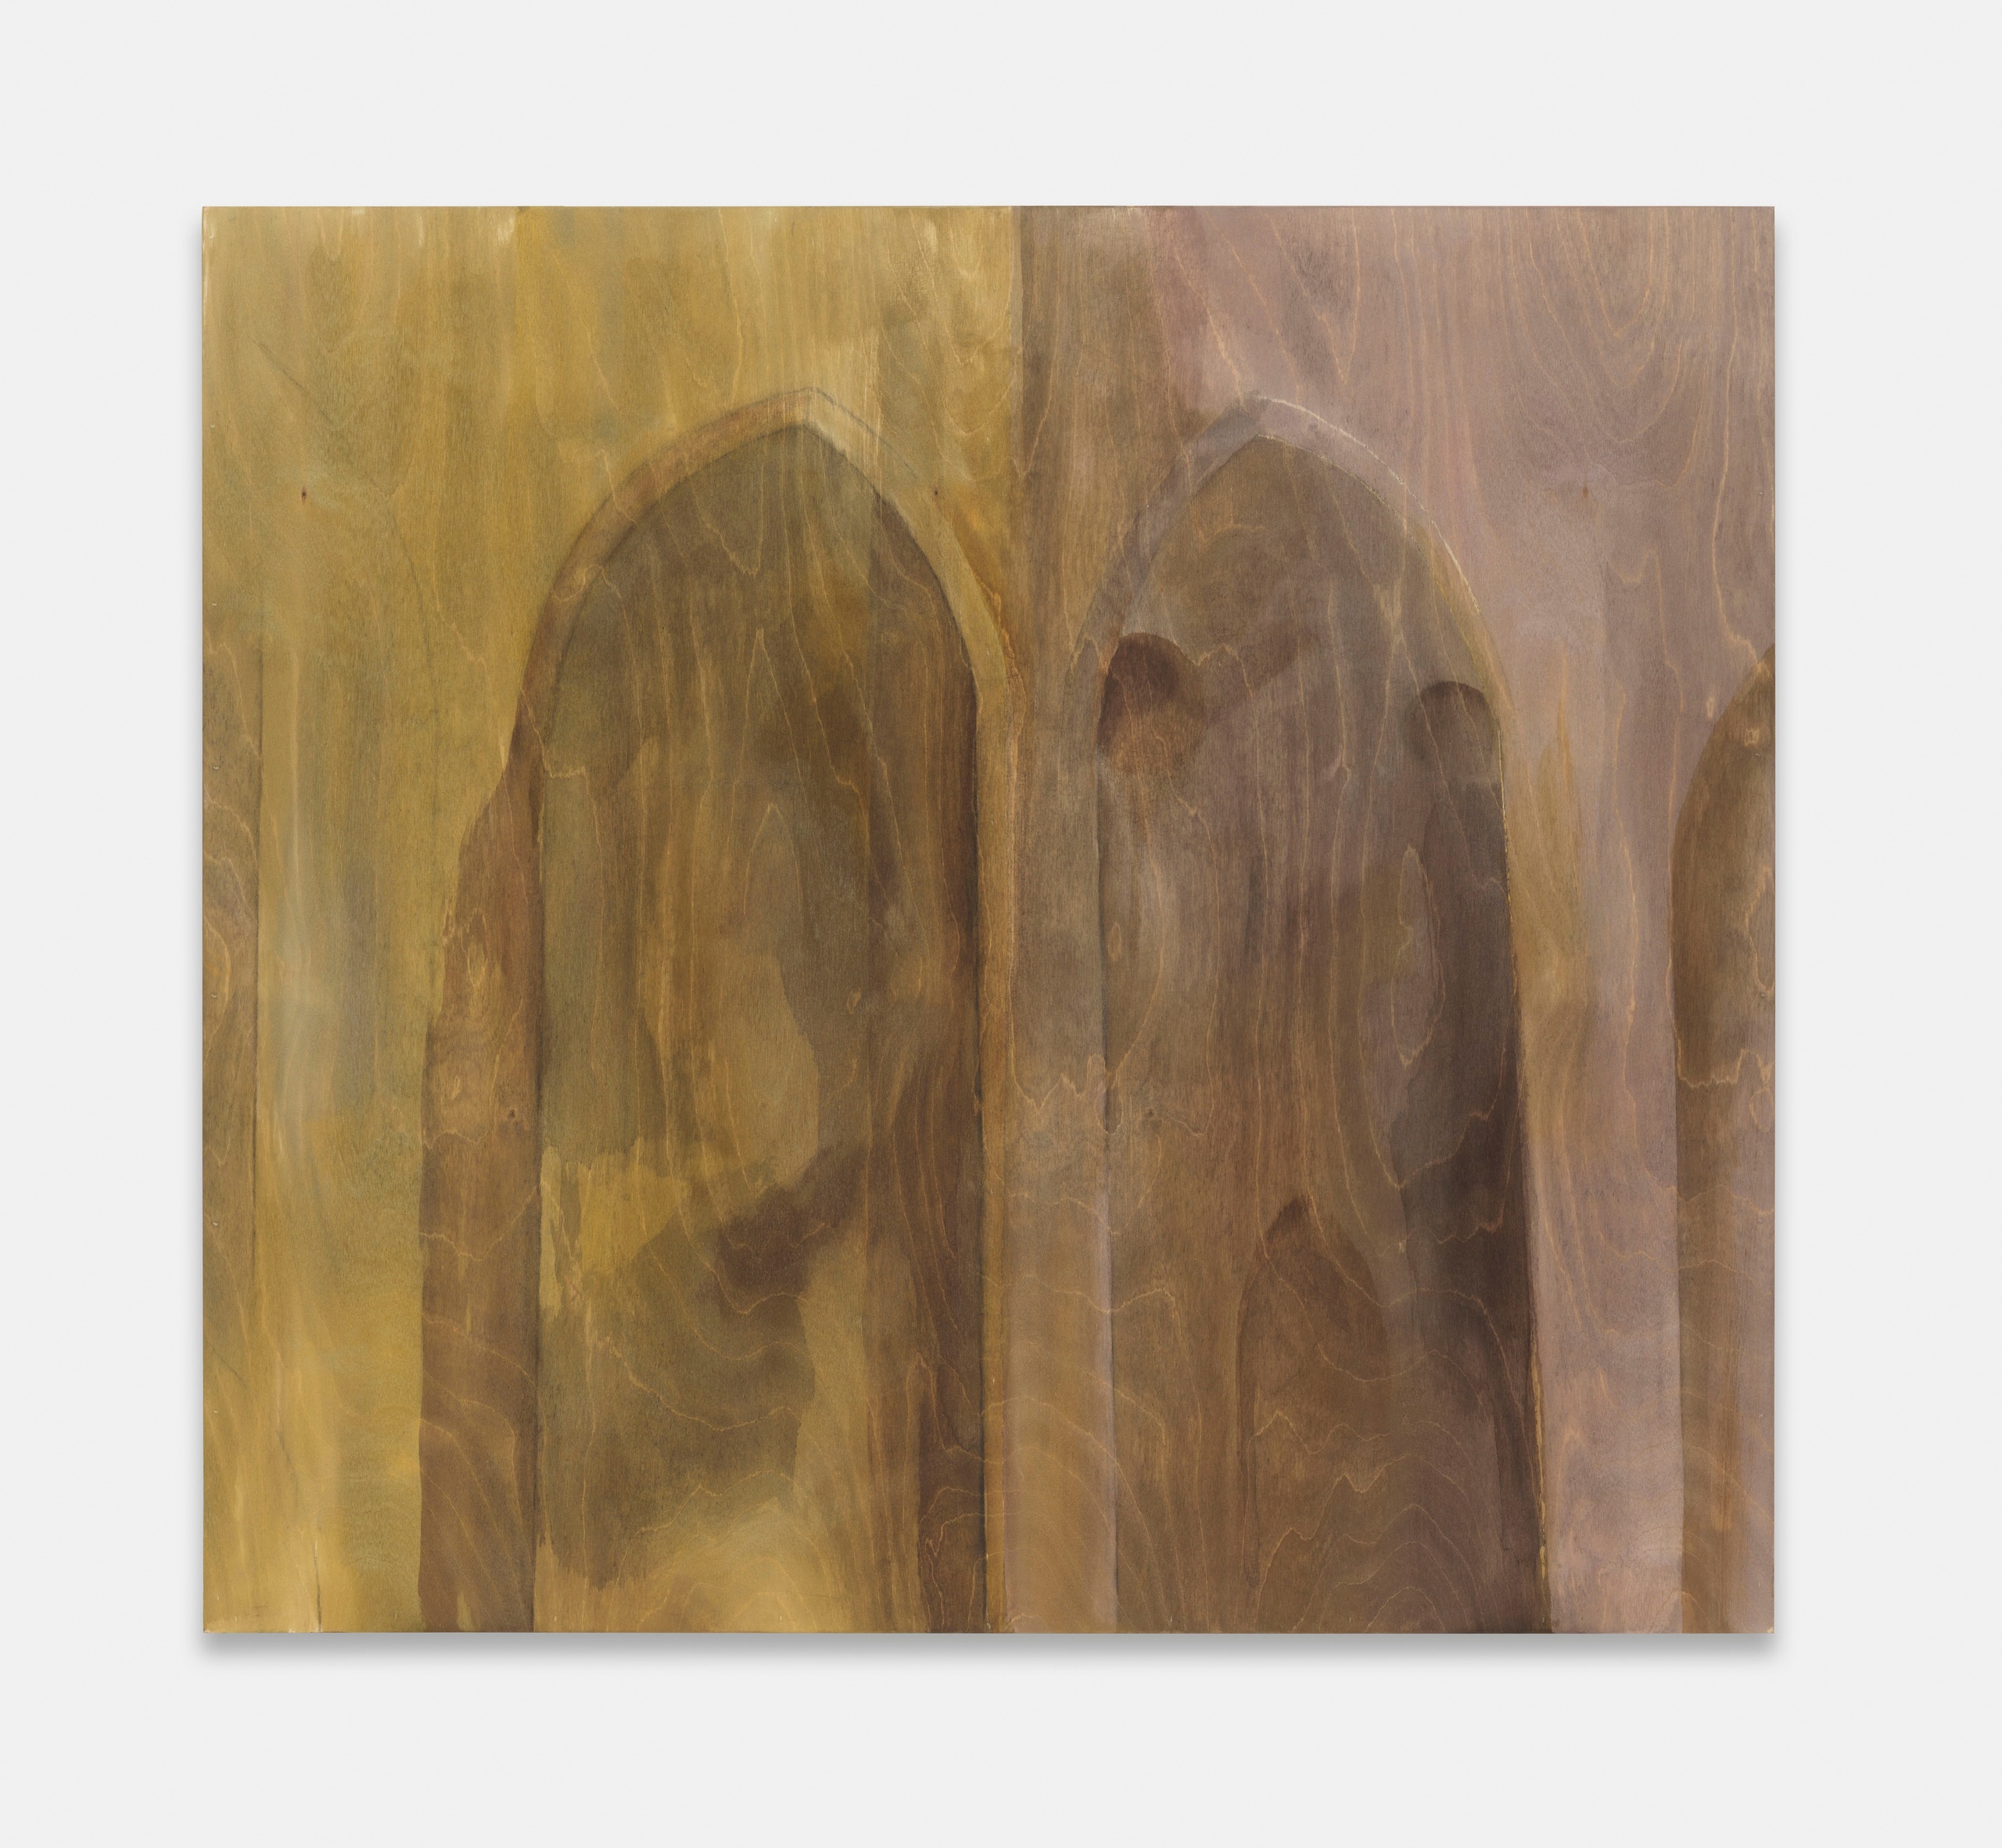 Beaux MendesUntitled, 2022wood stain on panel76.5 x 84.5 cm | 30 x 33 1/4 in